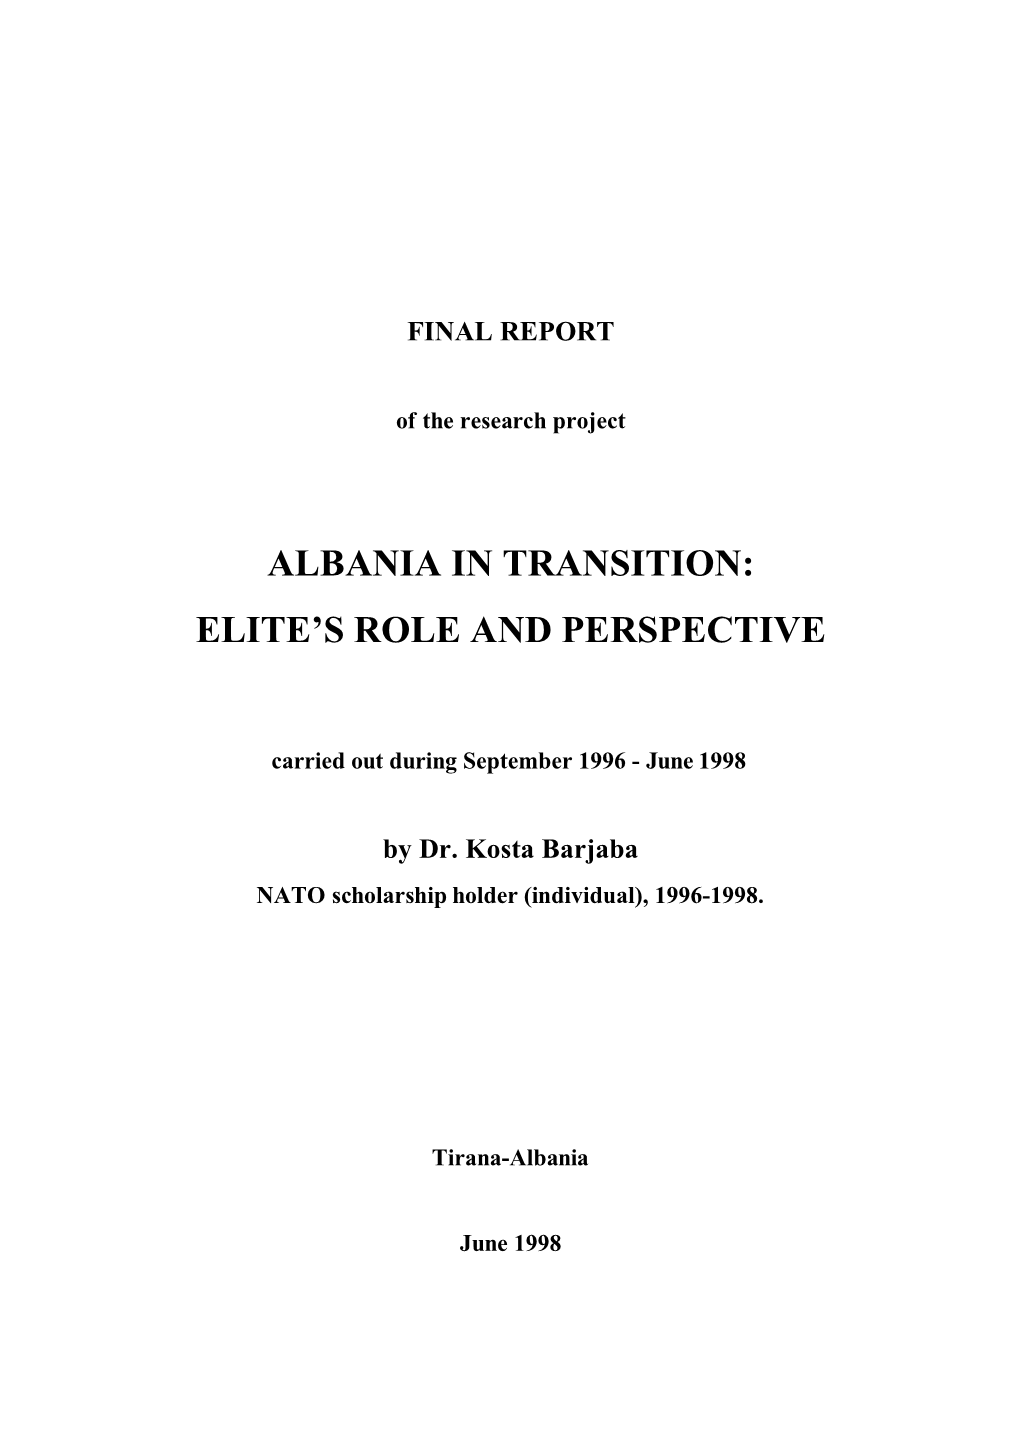 Albania in Transition: Elite’S Role and Perspective